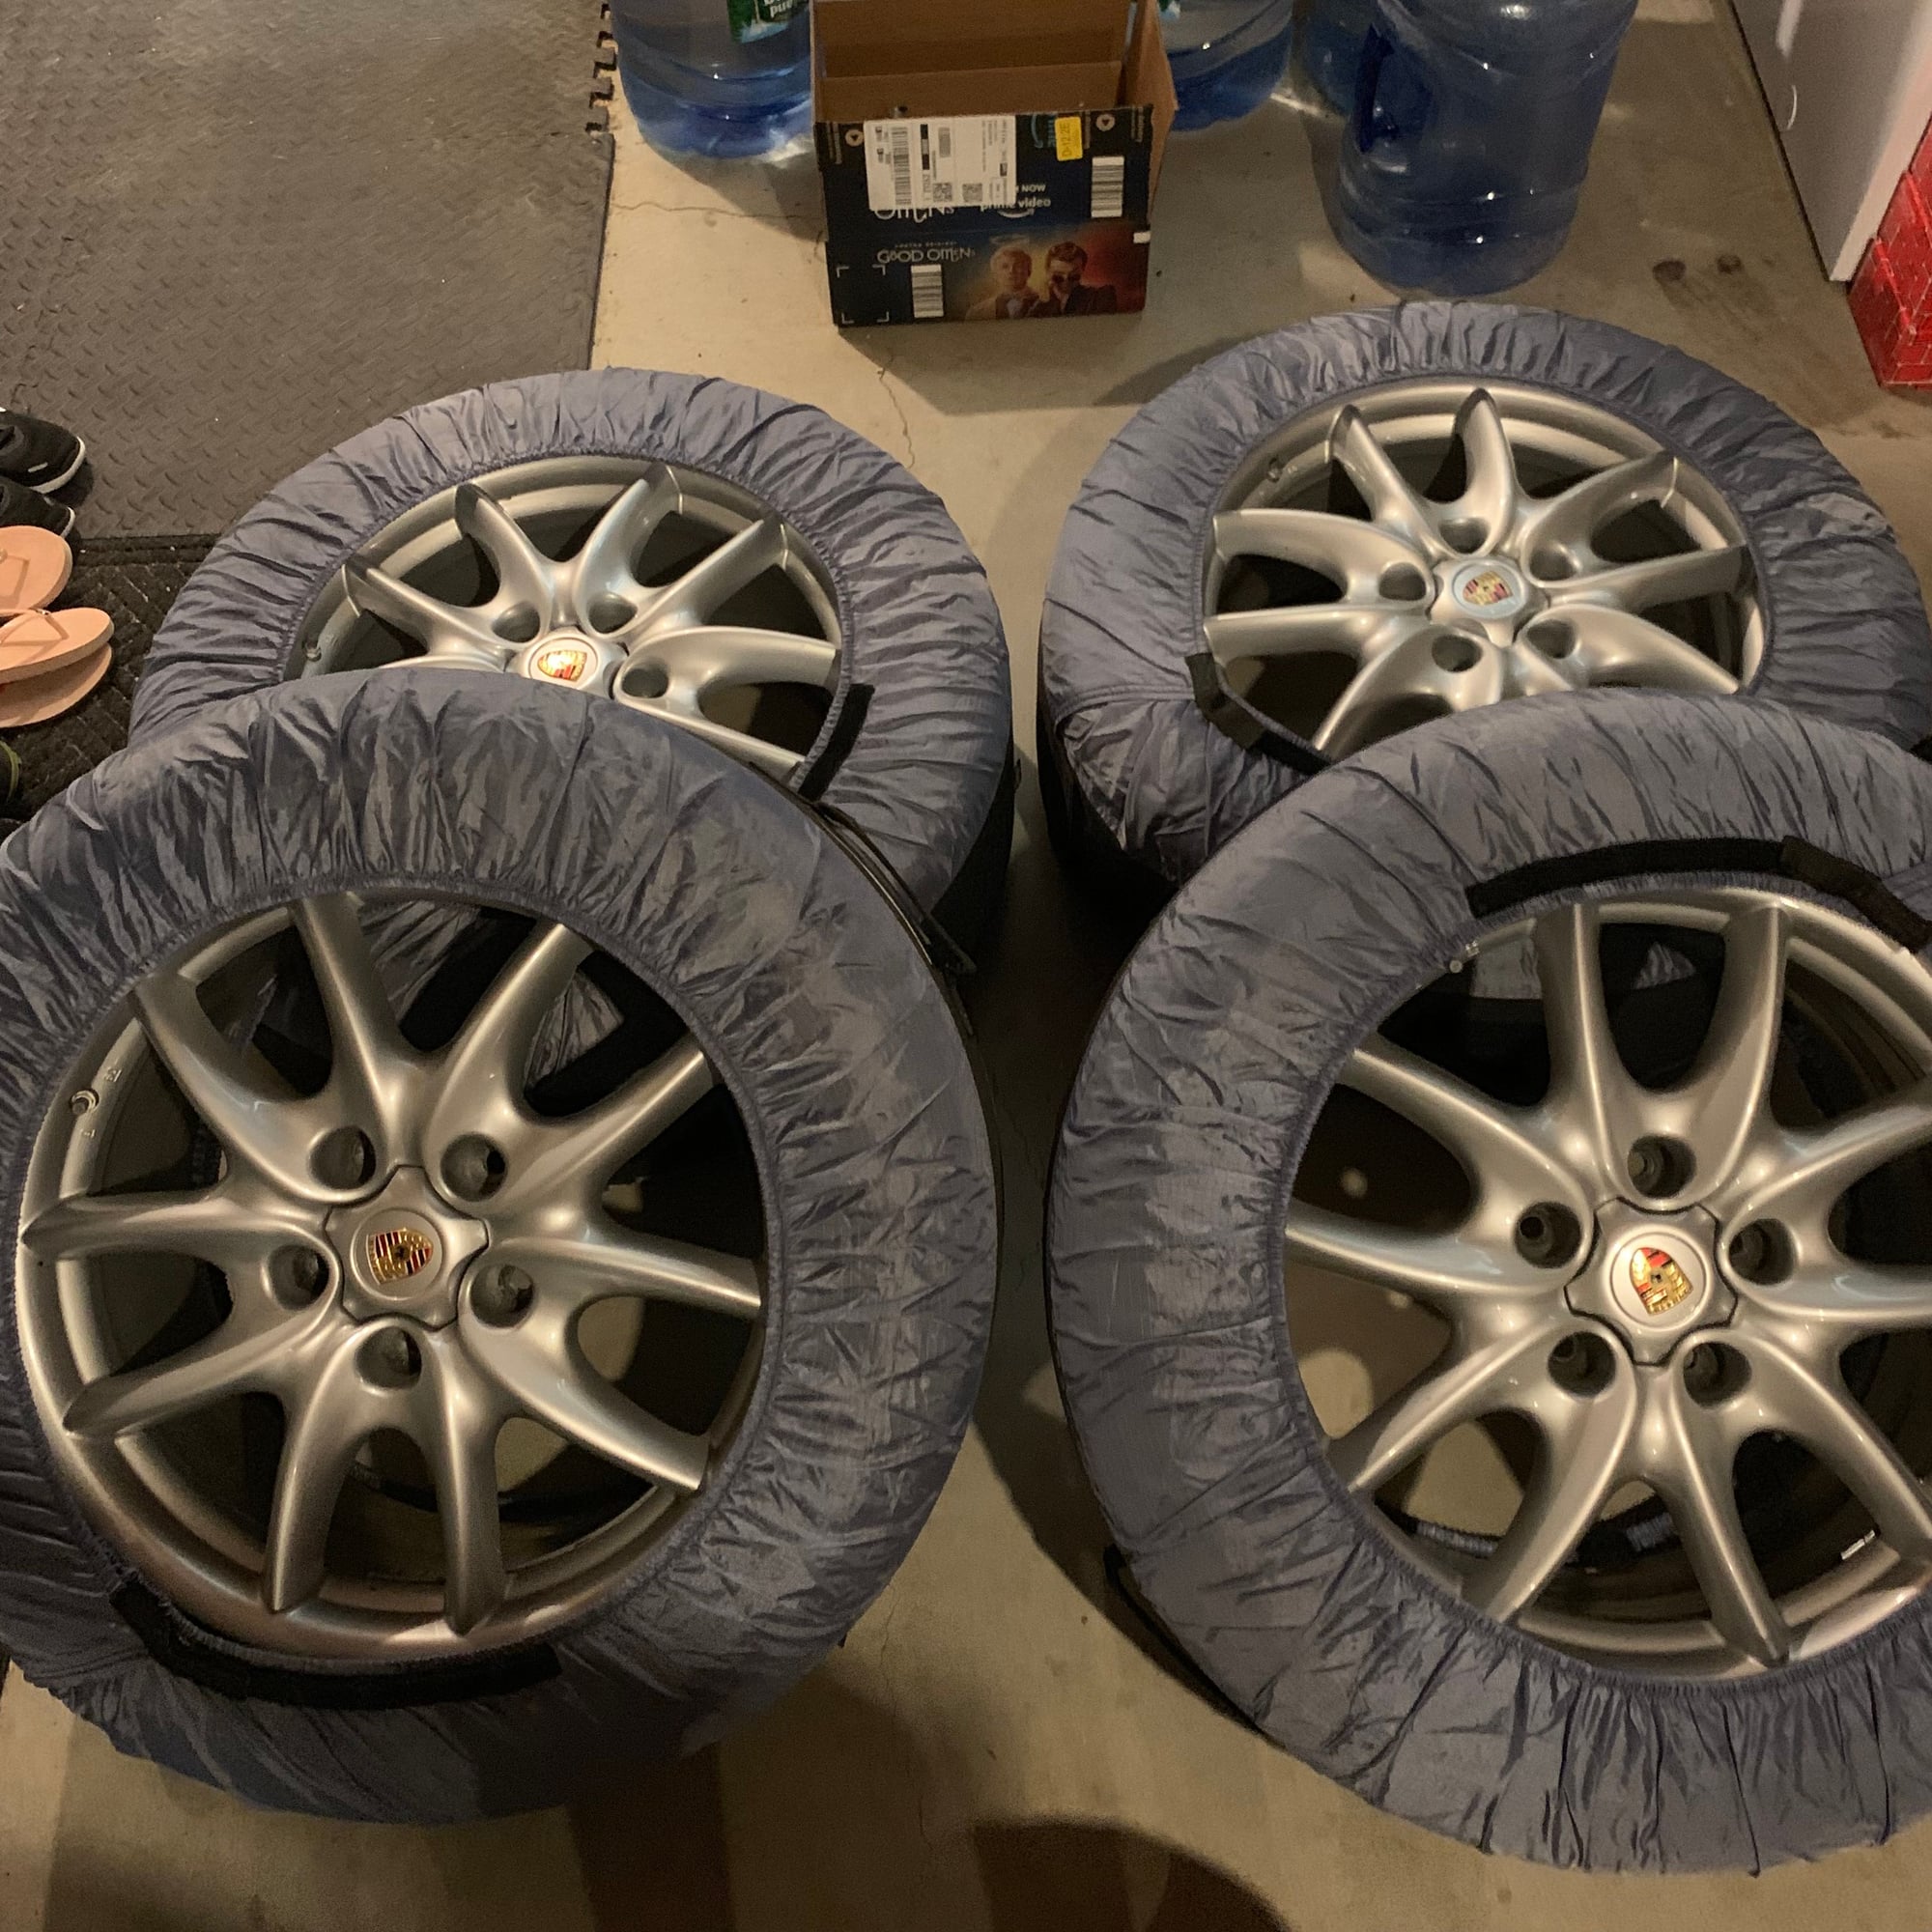 Wheels and Tires/Axles - Cayenne wheels and snow tires - Used - All Years Porsche Cayenne - Windham, NH 03087, United States